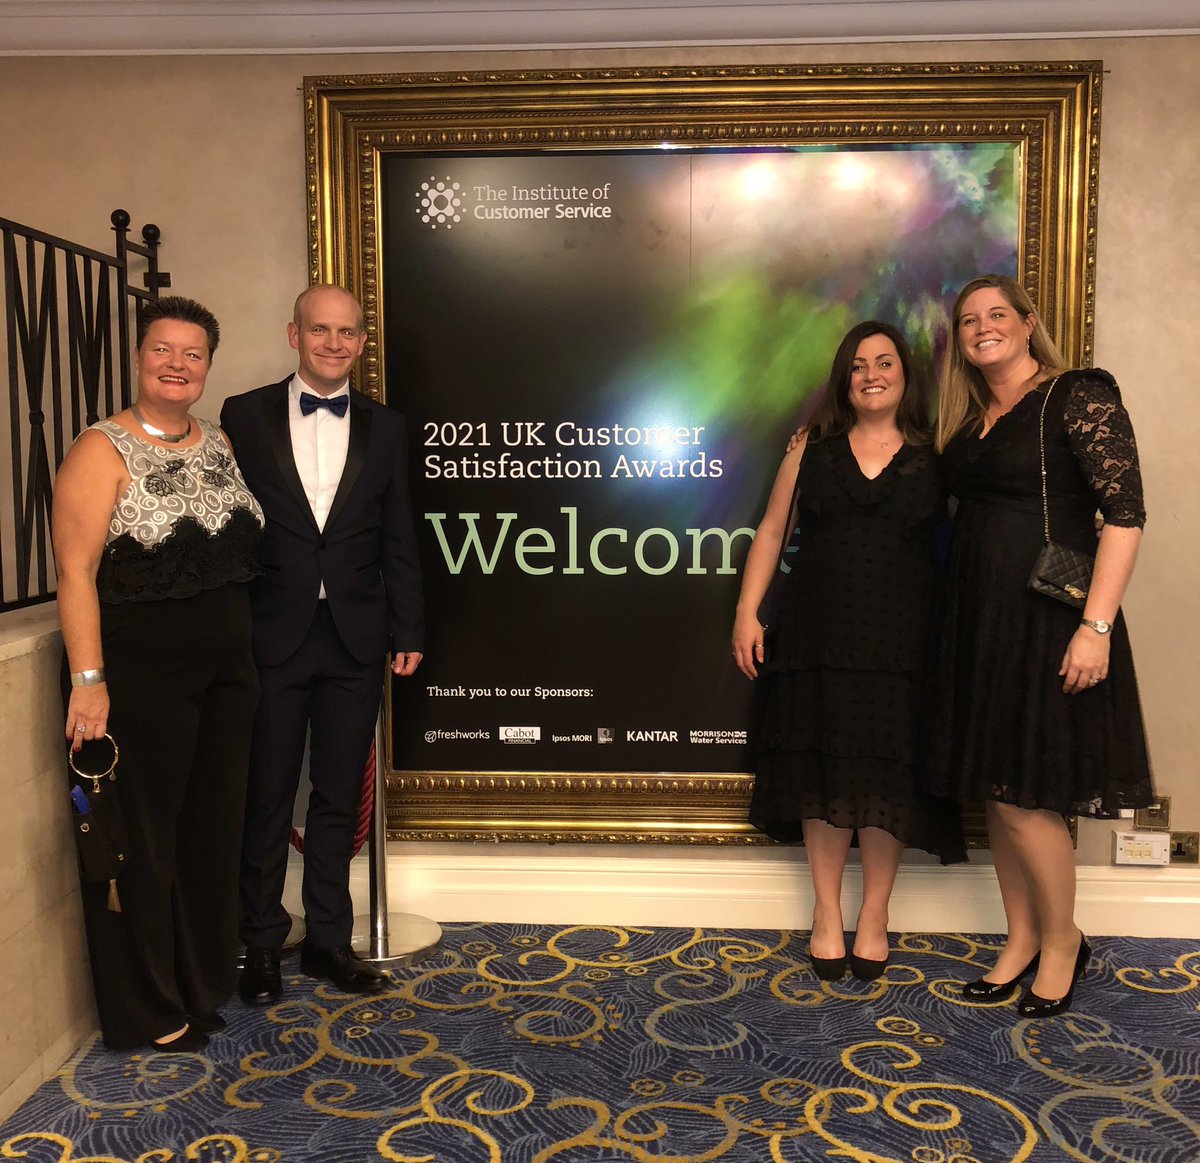 Very excited to be nominated for the #Changemaker award by @instituteofcs UK Awards this evening with @wessexwater, where @pelican_uk helped process over 14.5K applications for the #NHS uniform washing rebate. Good luck to all the finalists this evening! #CustomerExcellence